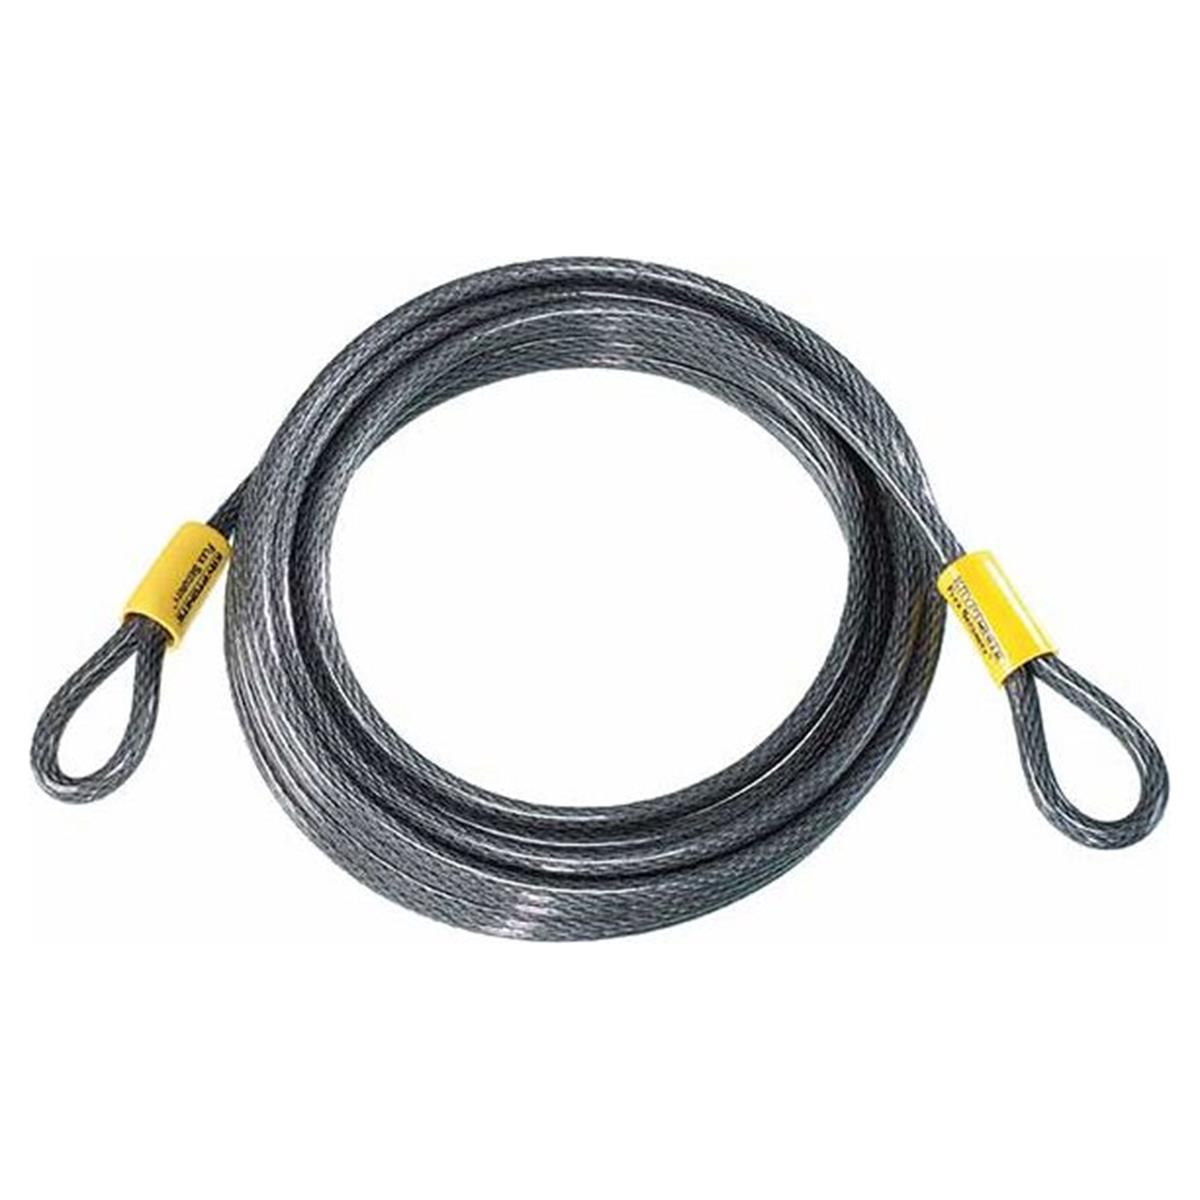 Kryptonite Cable for Cable Lock Kryptoflex 1030 Looped 10 mm x 930 cm